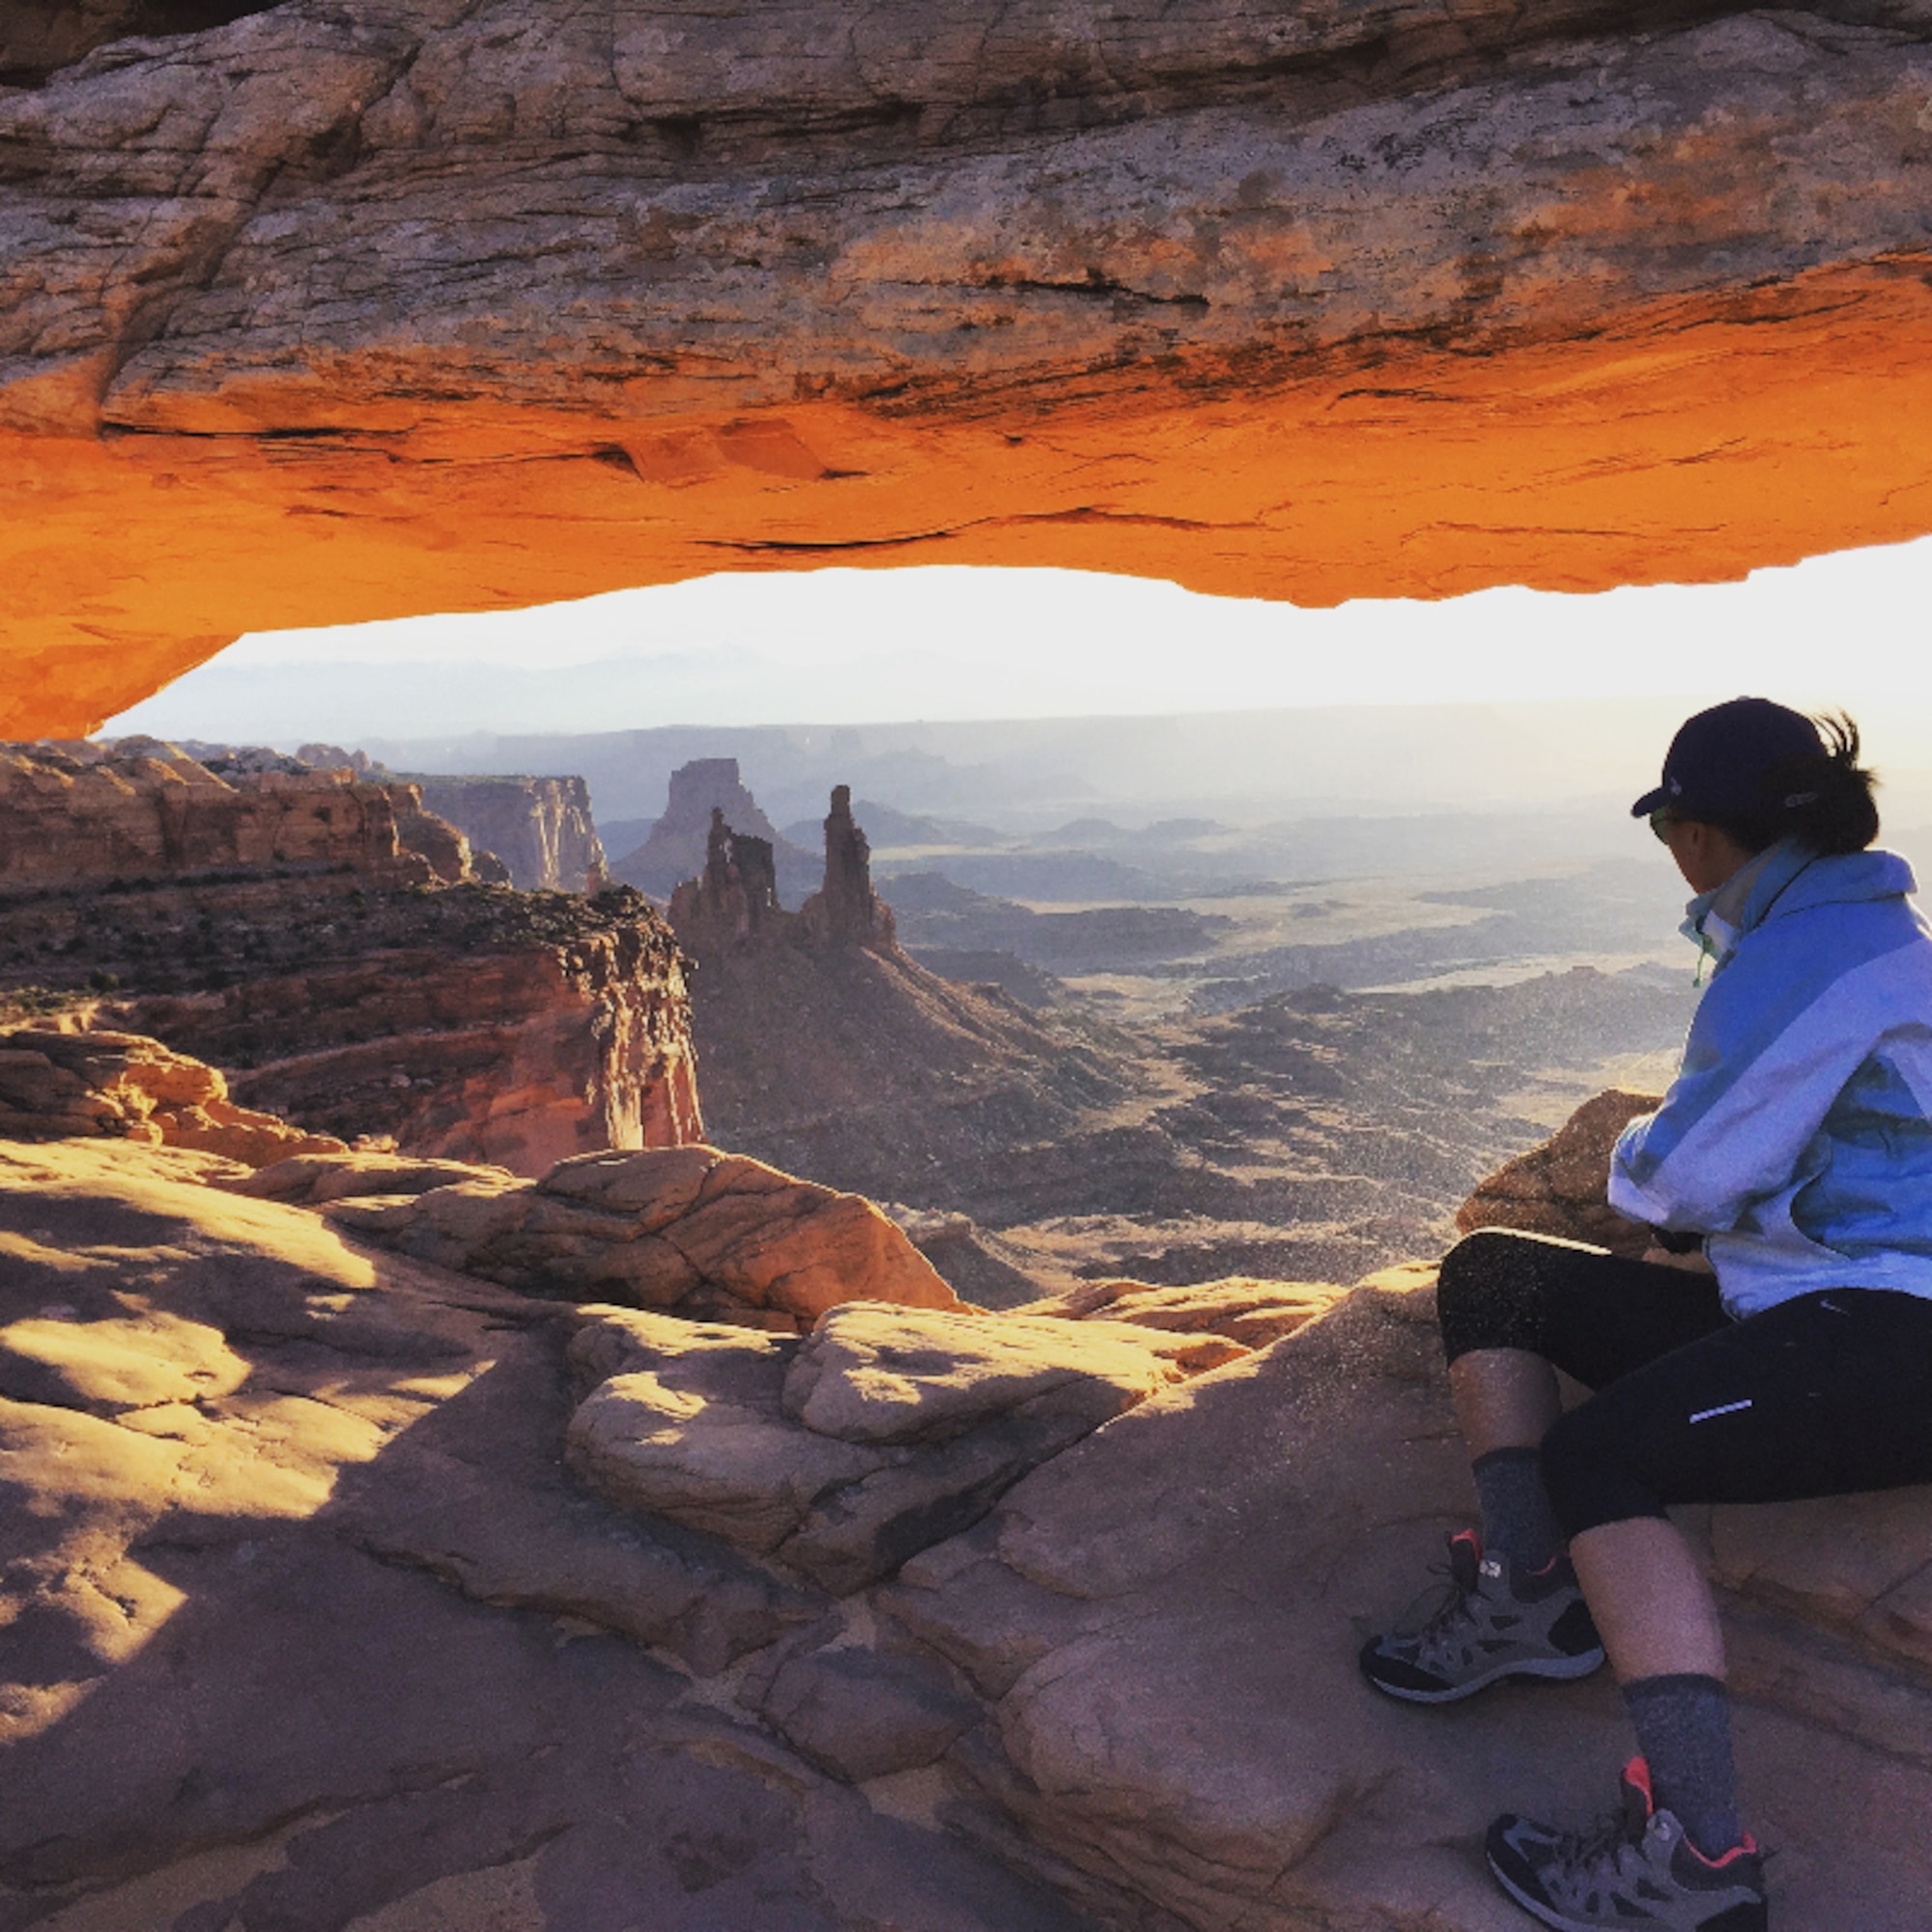 Senior Airman Grace Lee, 56th Fighter Wing Public Affairs photojournalist, looks over the view sitting underneath Mesa Arch Nov. 3 in Canyonlands National Park in Utah. Mesa Arch is famous for its view, especially during sunrise. (U.S. Air Force photo by Senior Airman Grace Lee)  